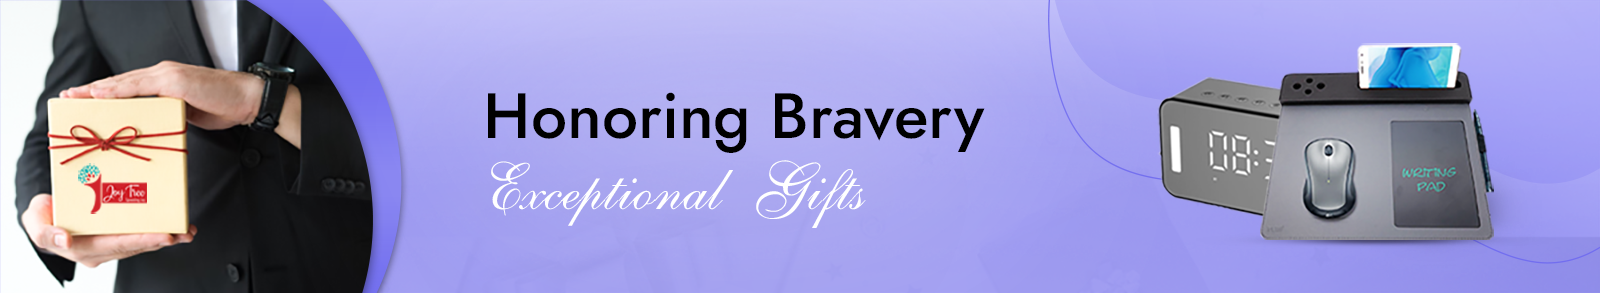 Honoring Bravery with Exceptional Gifts_1600